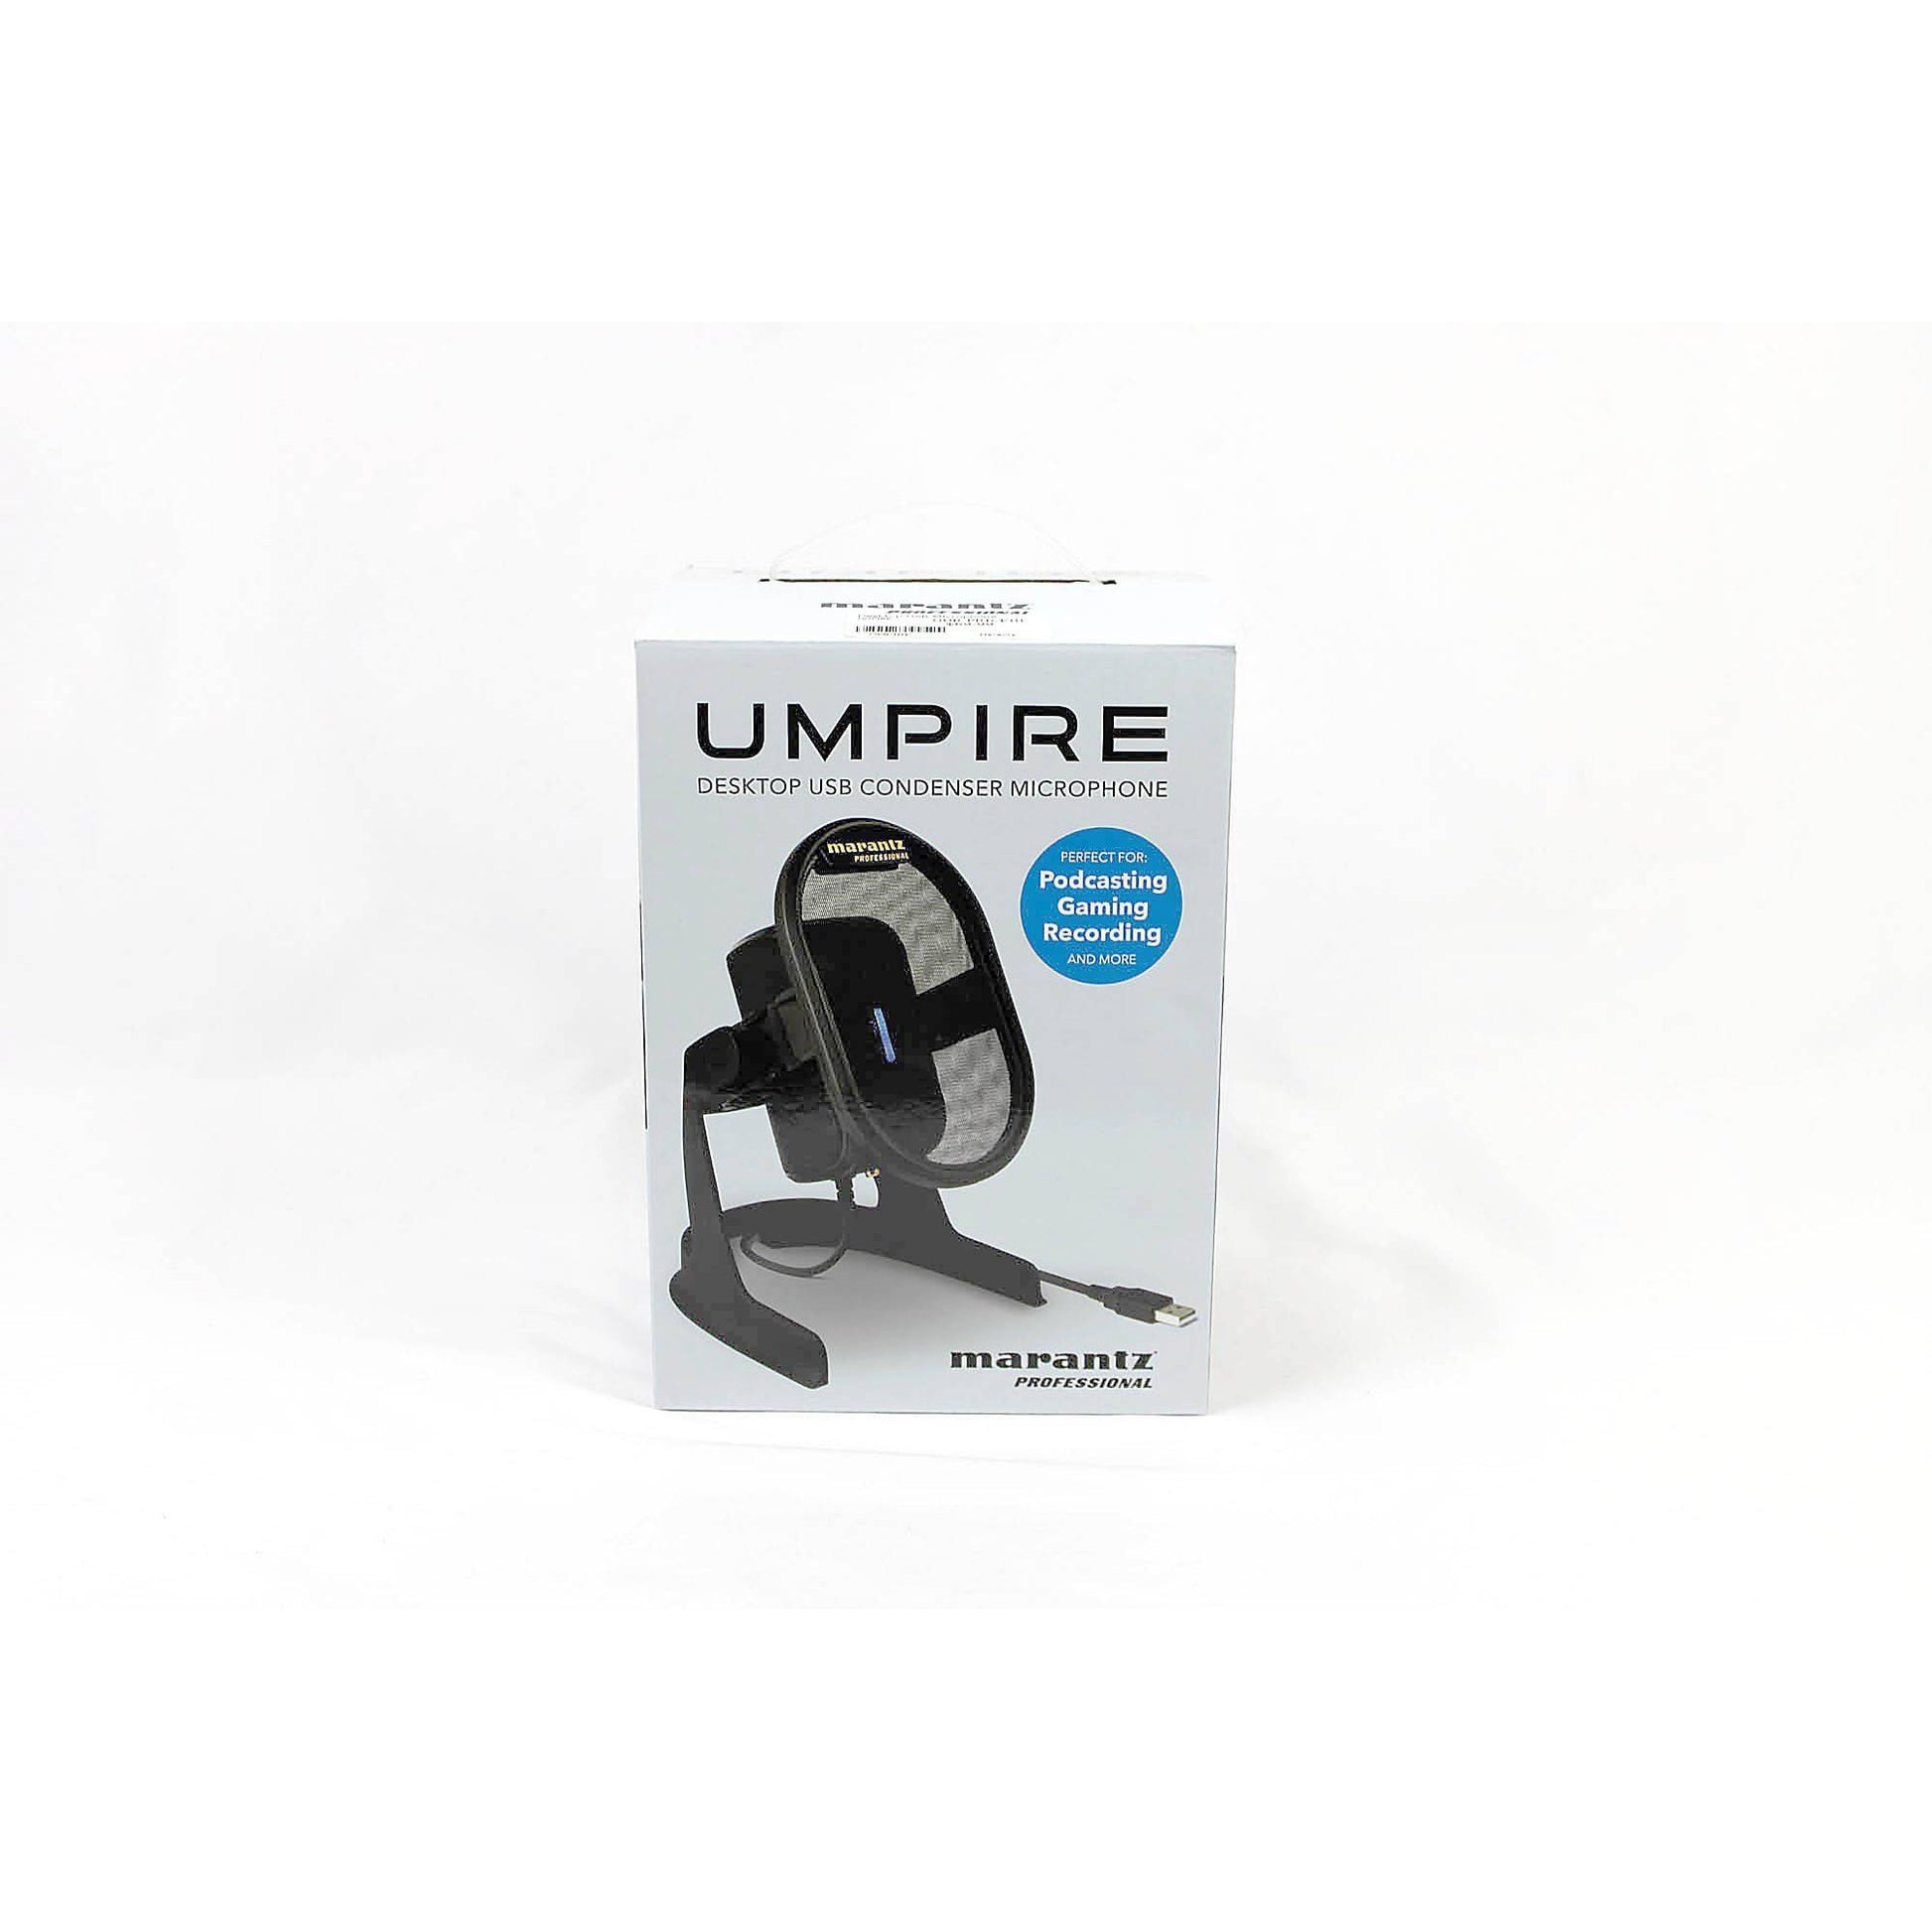 Marantz Professional Umpire - USB Microphone For Recording, Podcasting, Streaming and Gaming With Desktop Stand, Pop Filter and Shockmount - Leitz Music-694318024249-UMPIRE